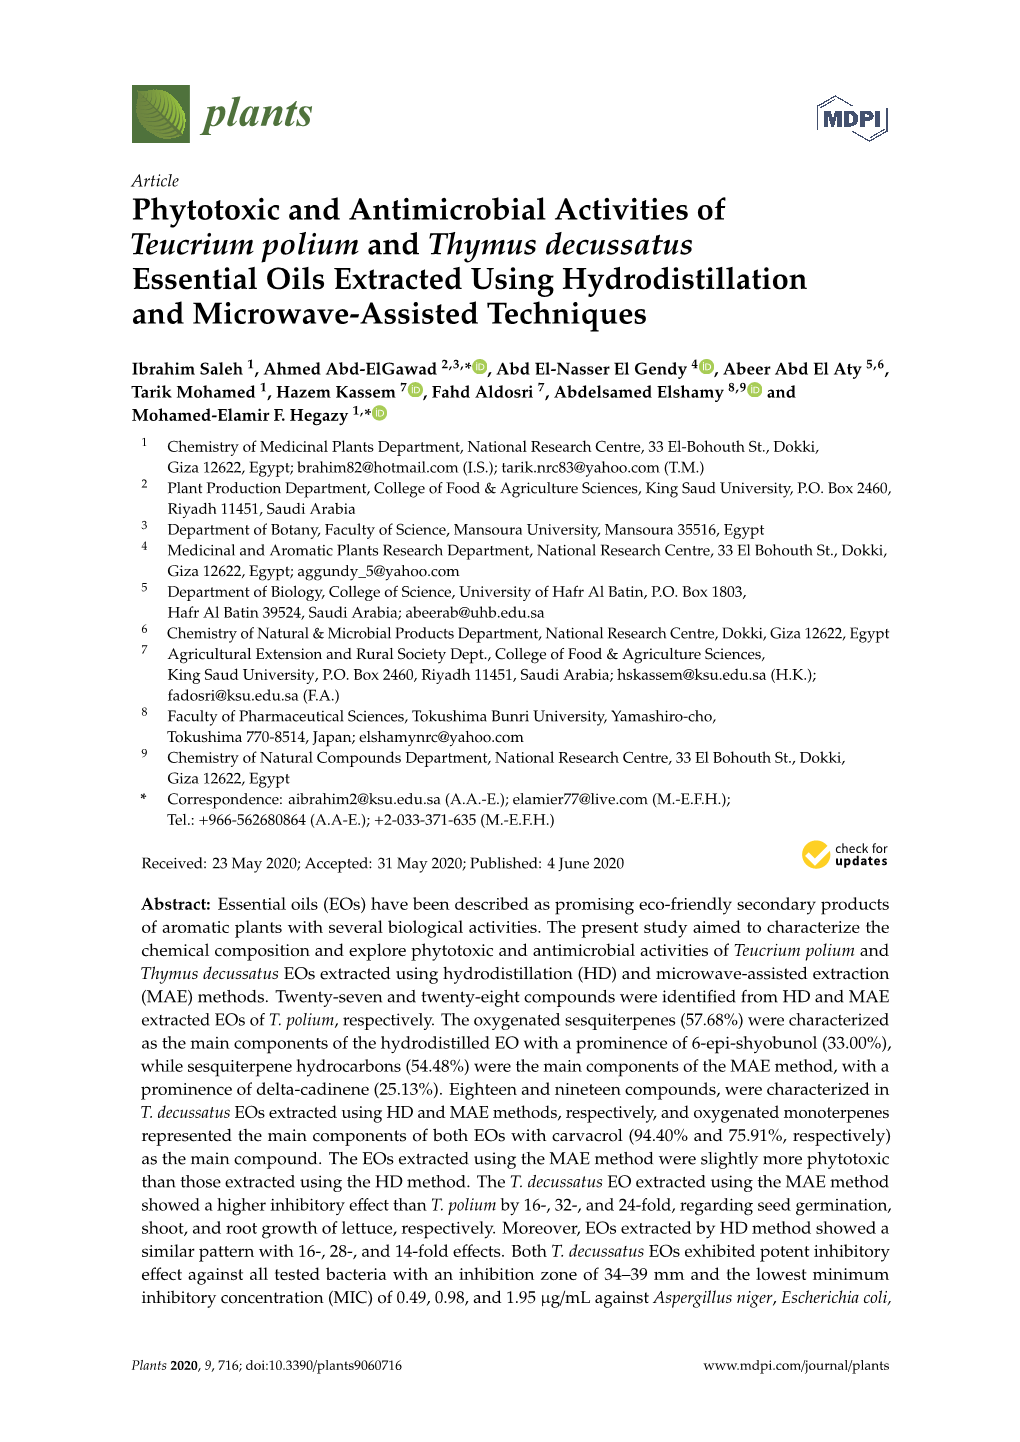 Phytotoxic and Antimicrobial Activities of Teucrium Polium and Thymus Decussatus Essential Oils Extracted Using Hydrodistillation and Microwave-Assisted Techniques